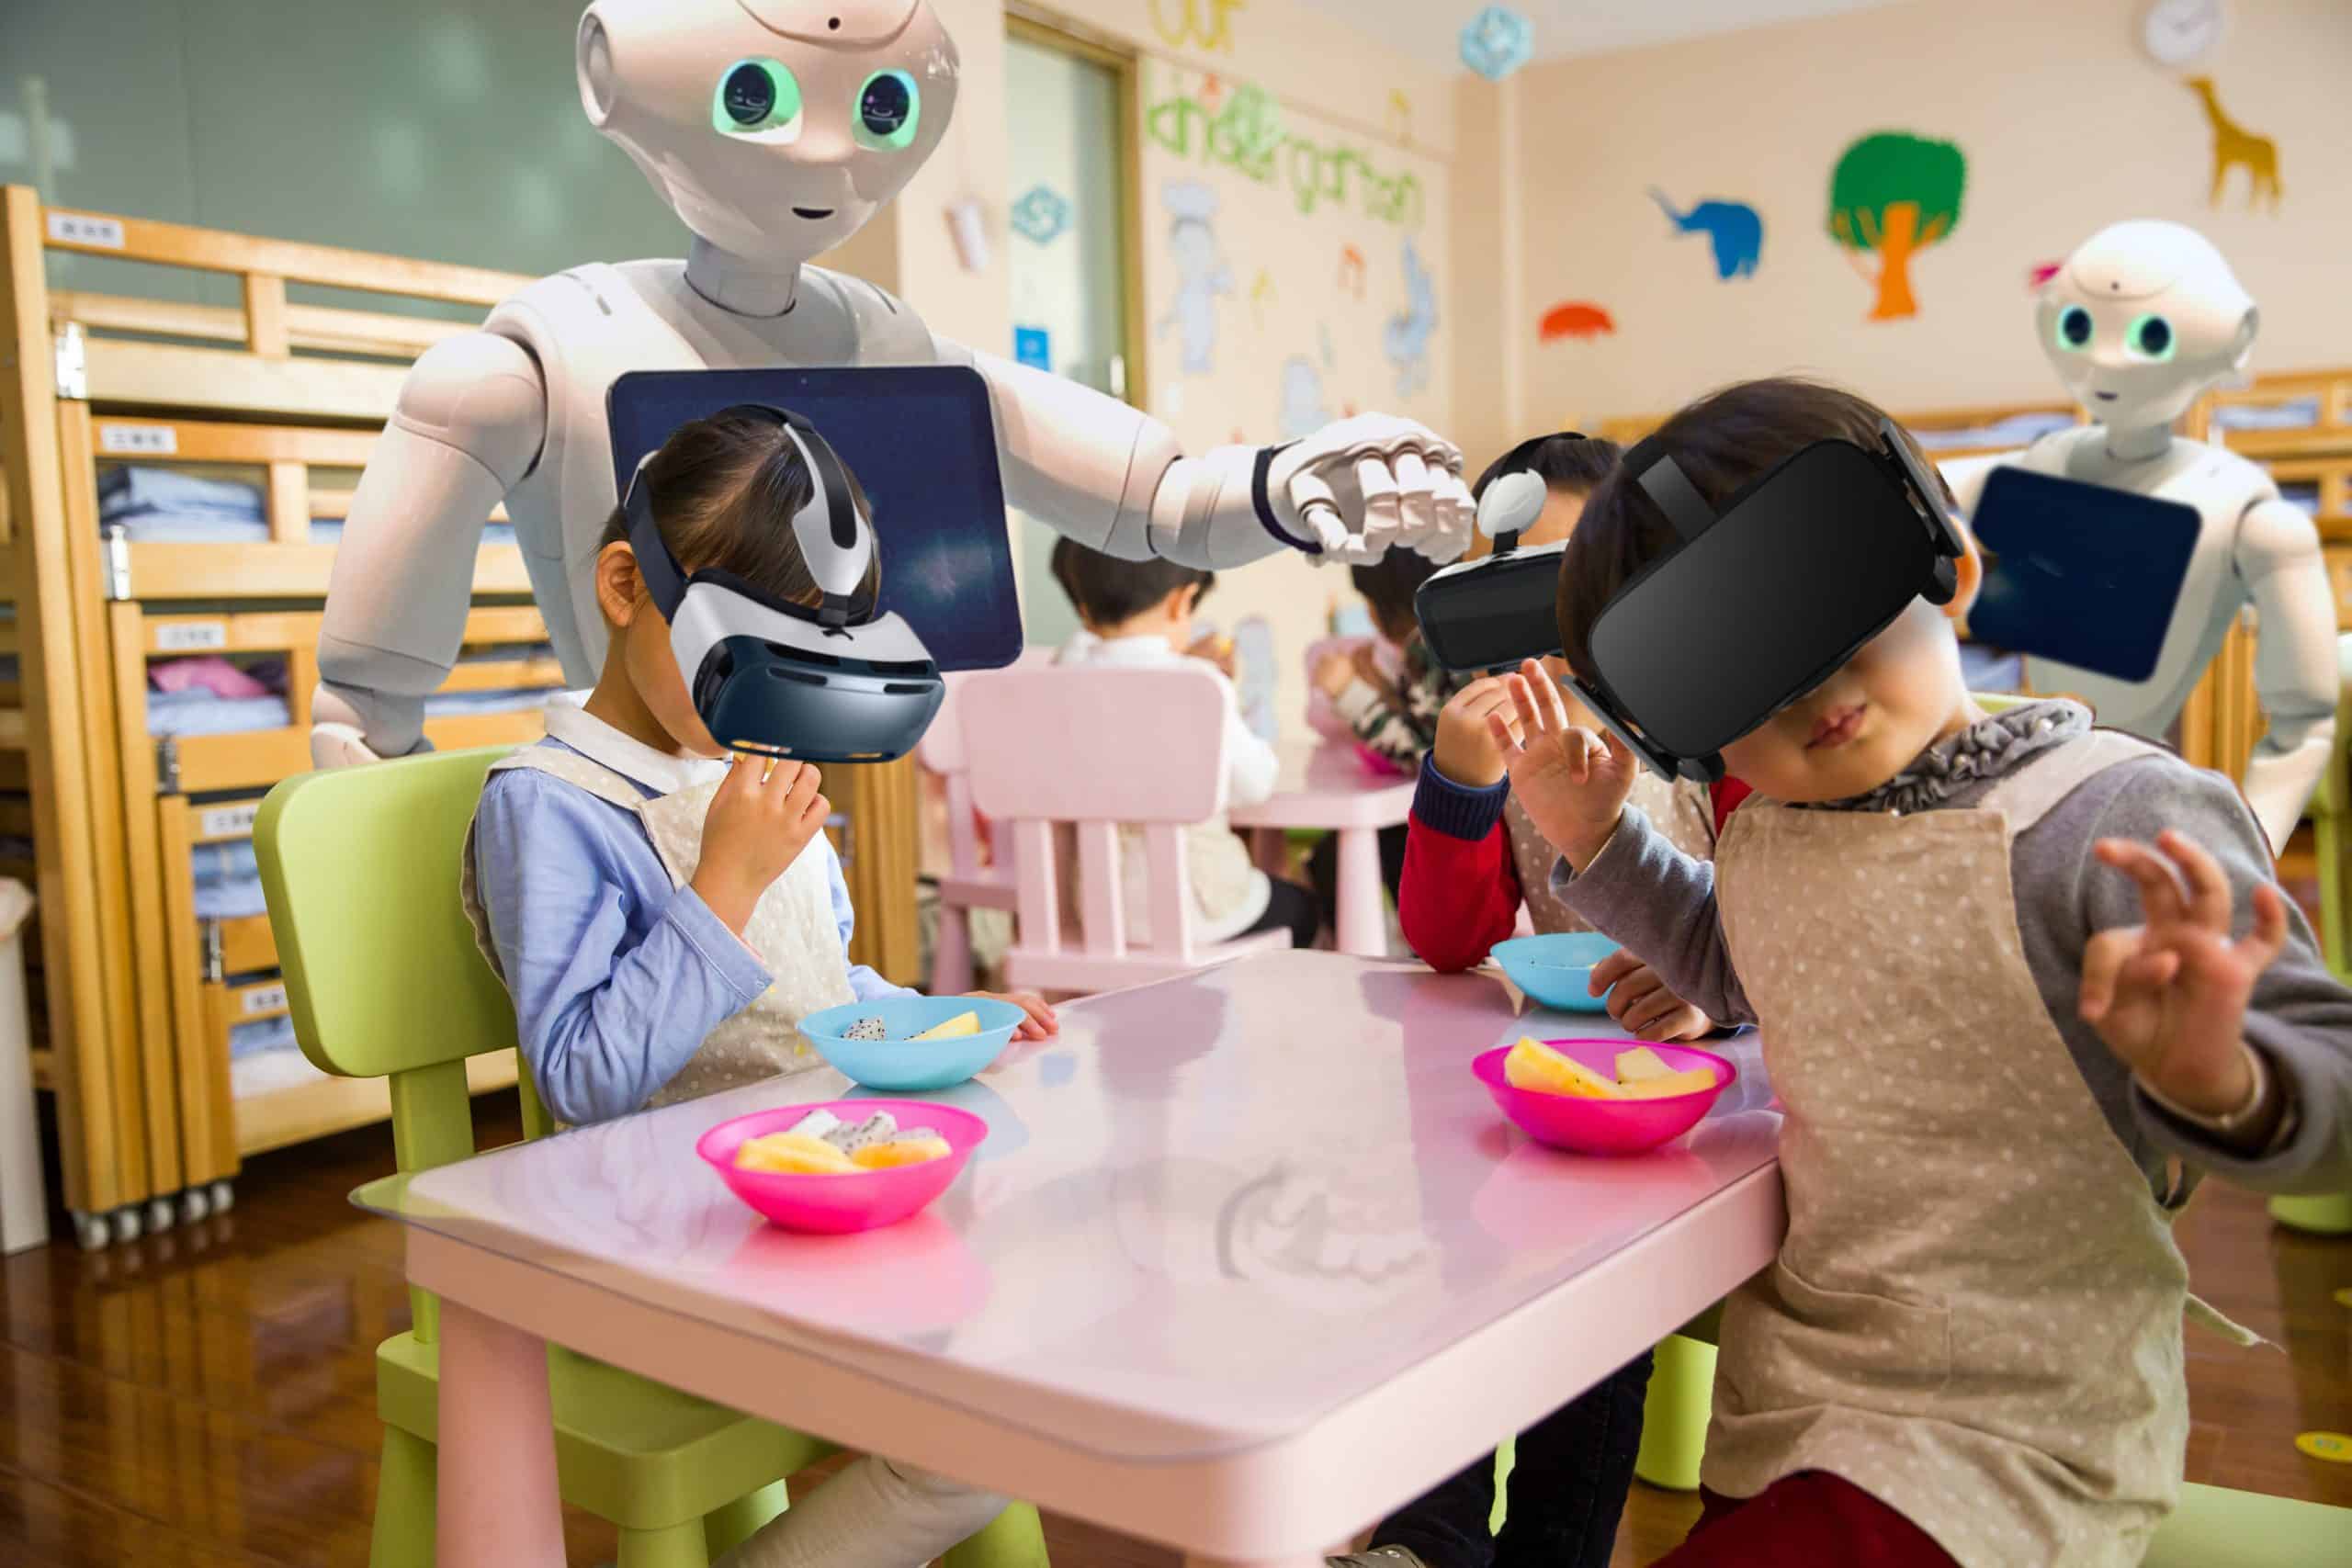 Advances in artificial intelligence will lead to the outsourcing of parenting within 30 years